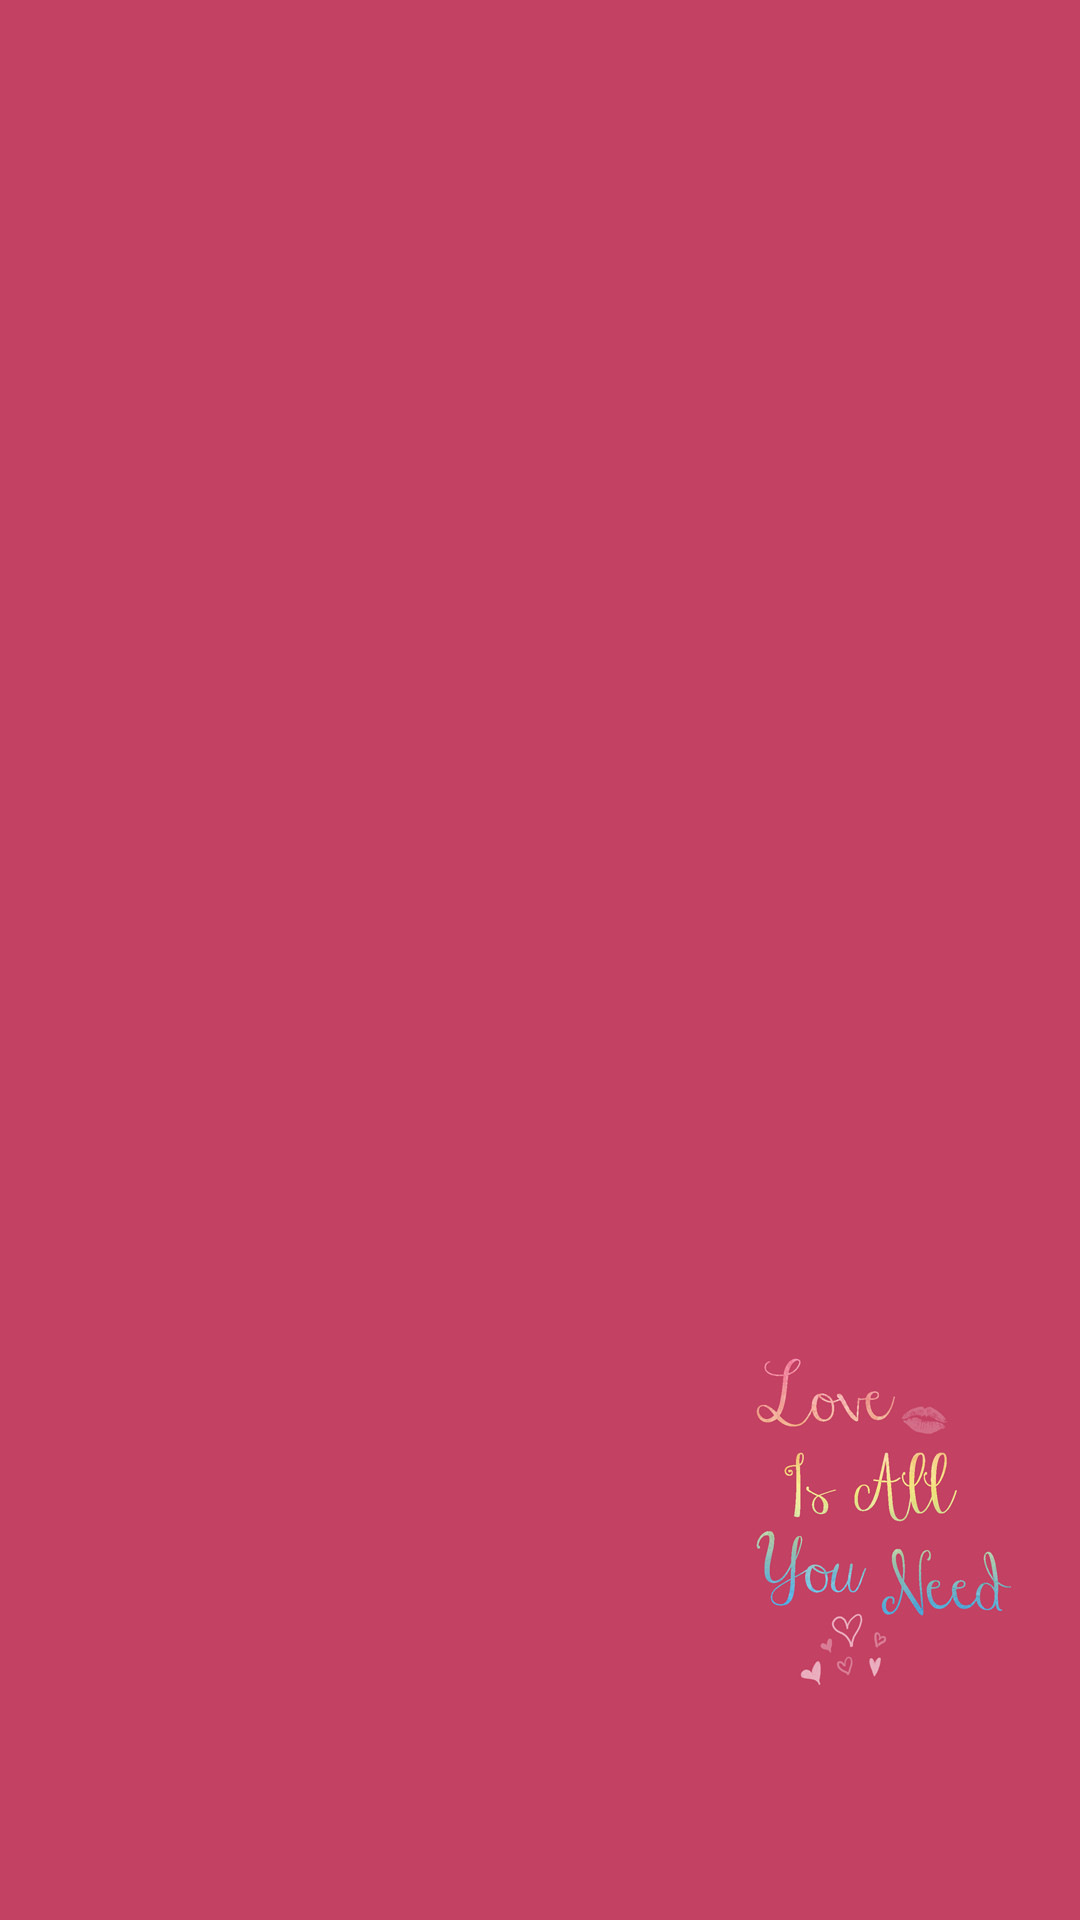 Quote Love Lips Rouge iPhone Wallpaper Pink Home Screen X Wallpaper Quotes